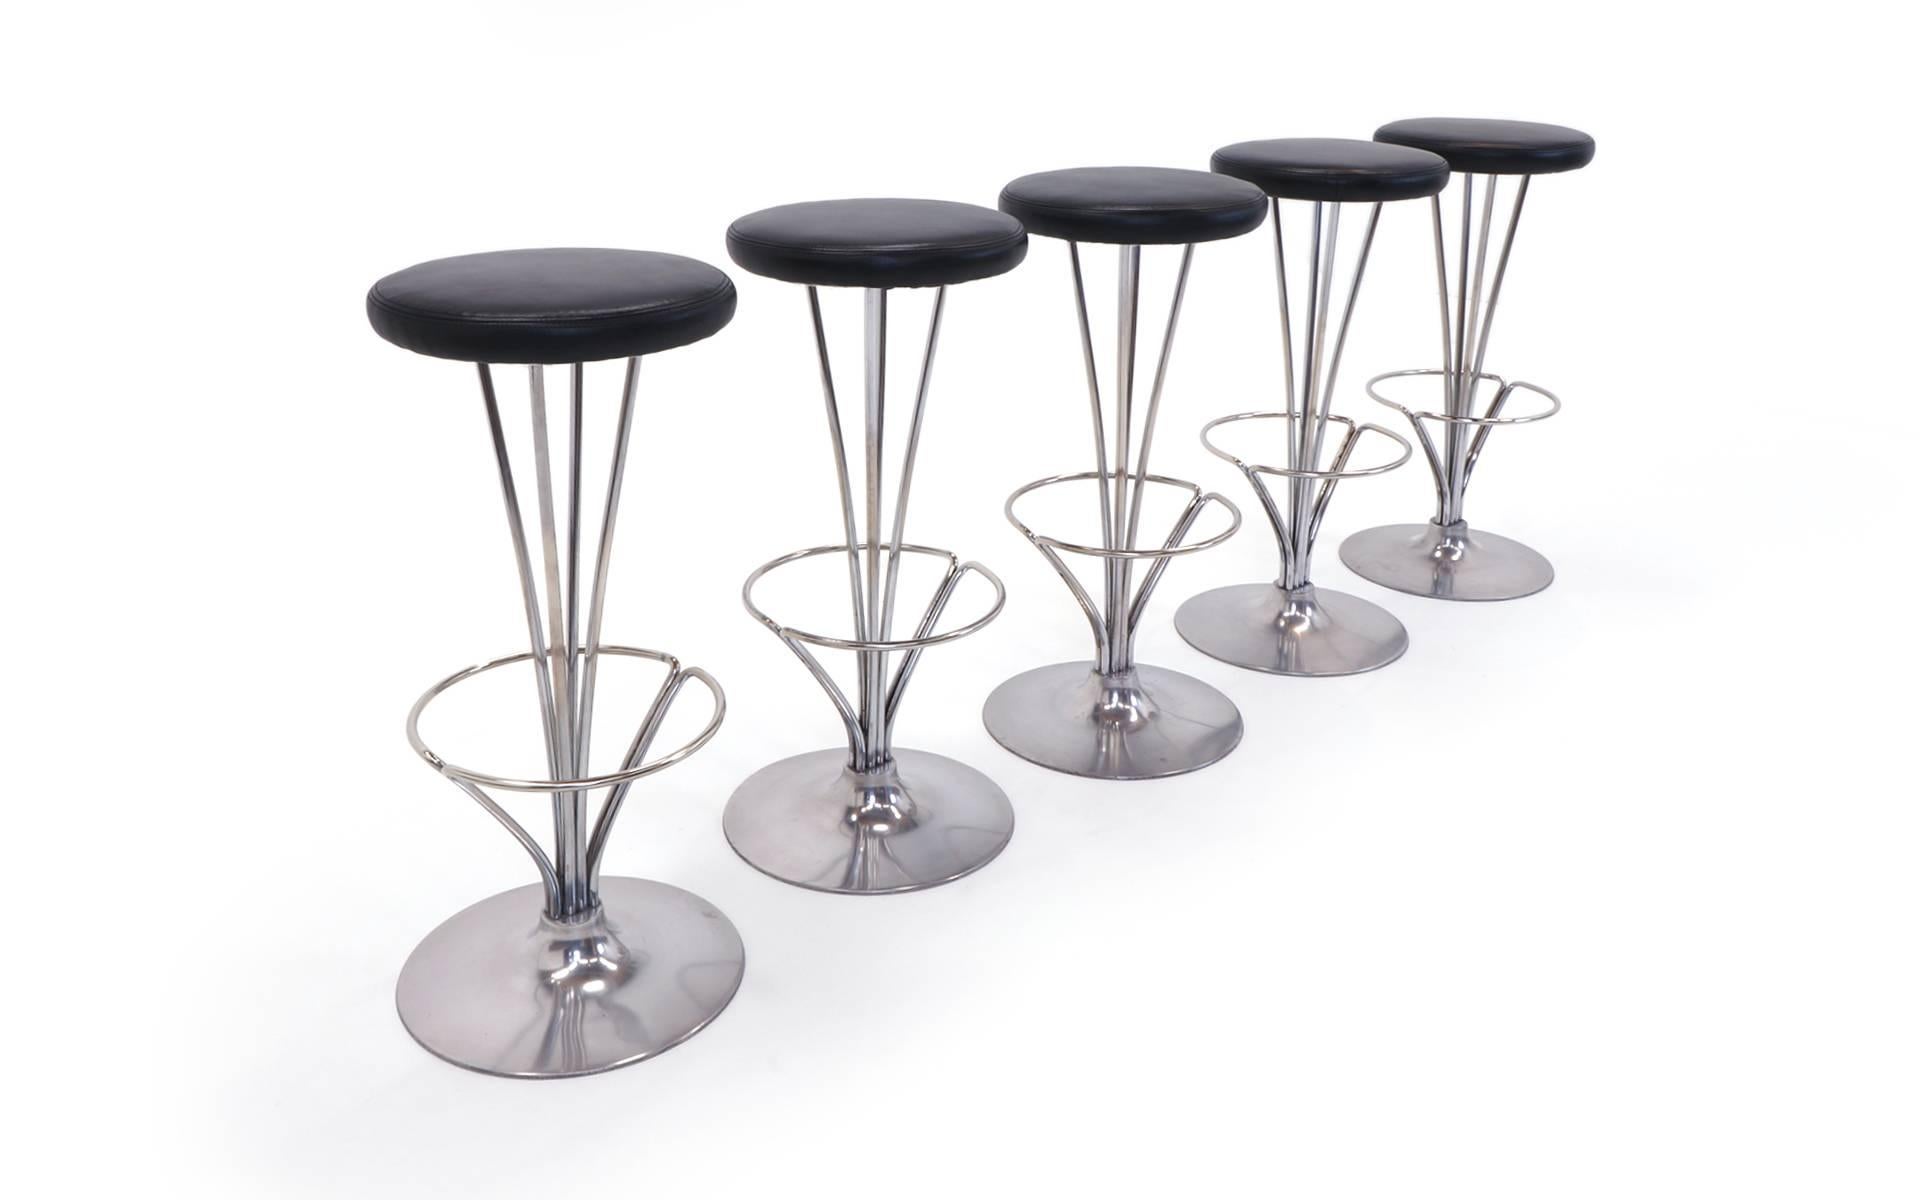 One of the best modern bar stool designs of the 20th century. Super sturdy aluminum and chromed steel construction with expertly reupholstered black leather seats. Signed Fritz Hansen. 31.25 inches tall, base diameter is 13.5 inches and seat